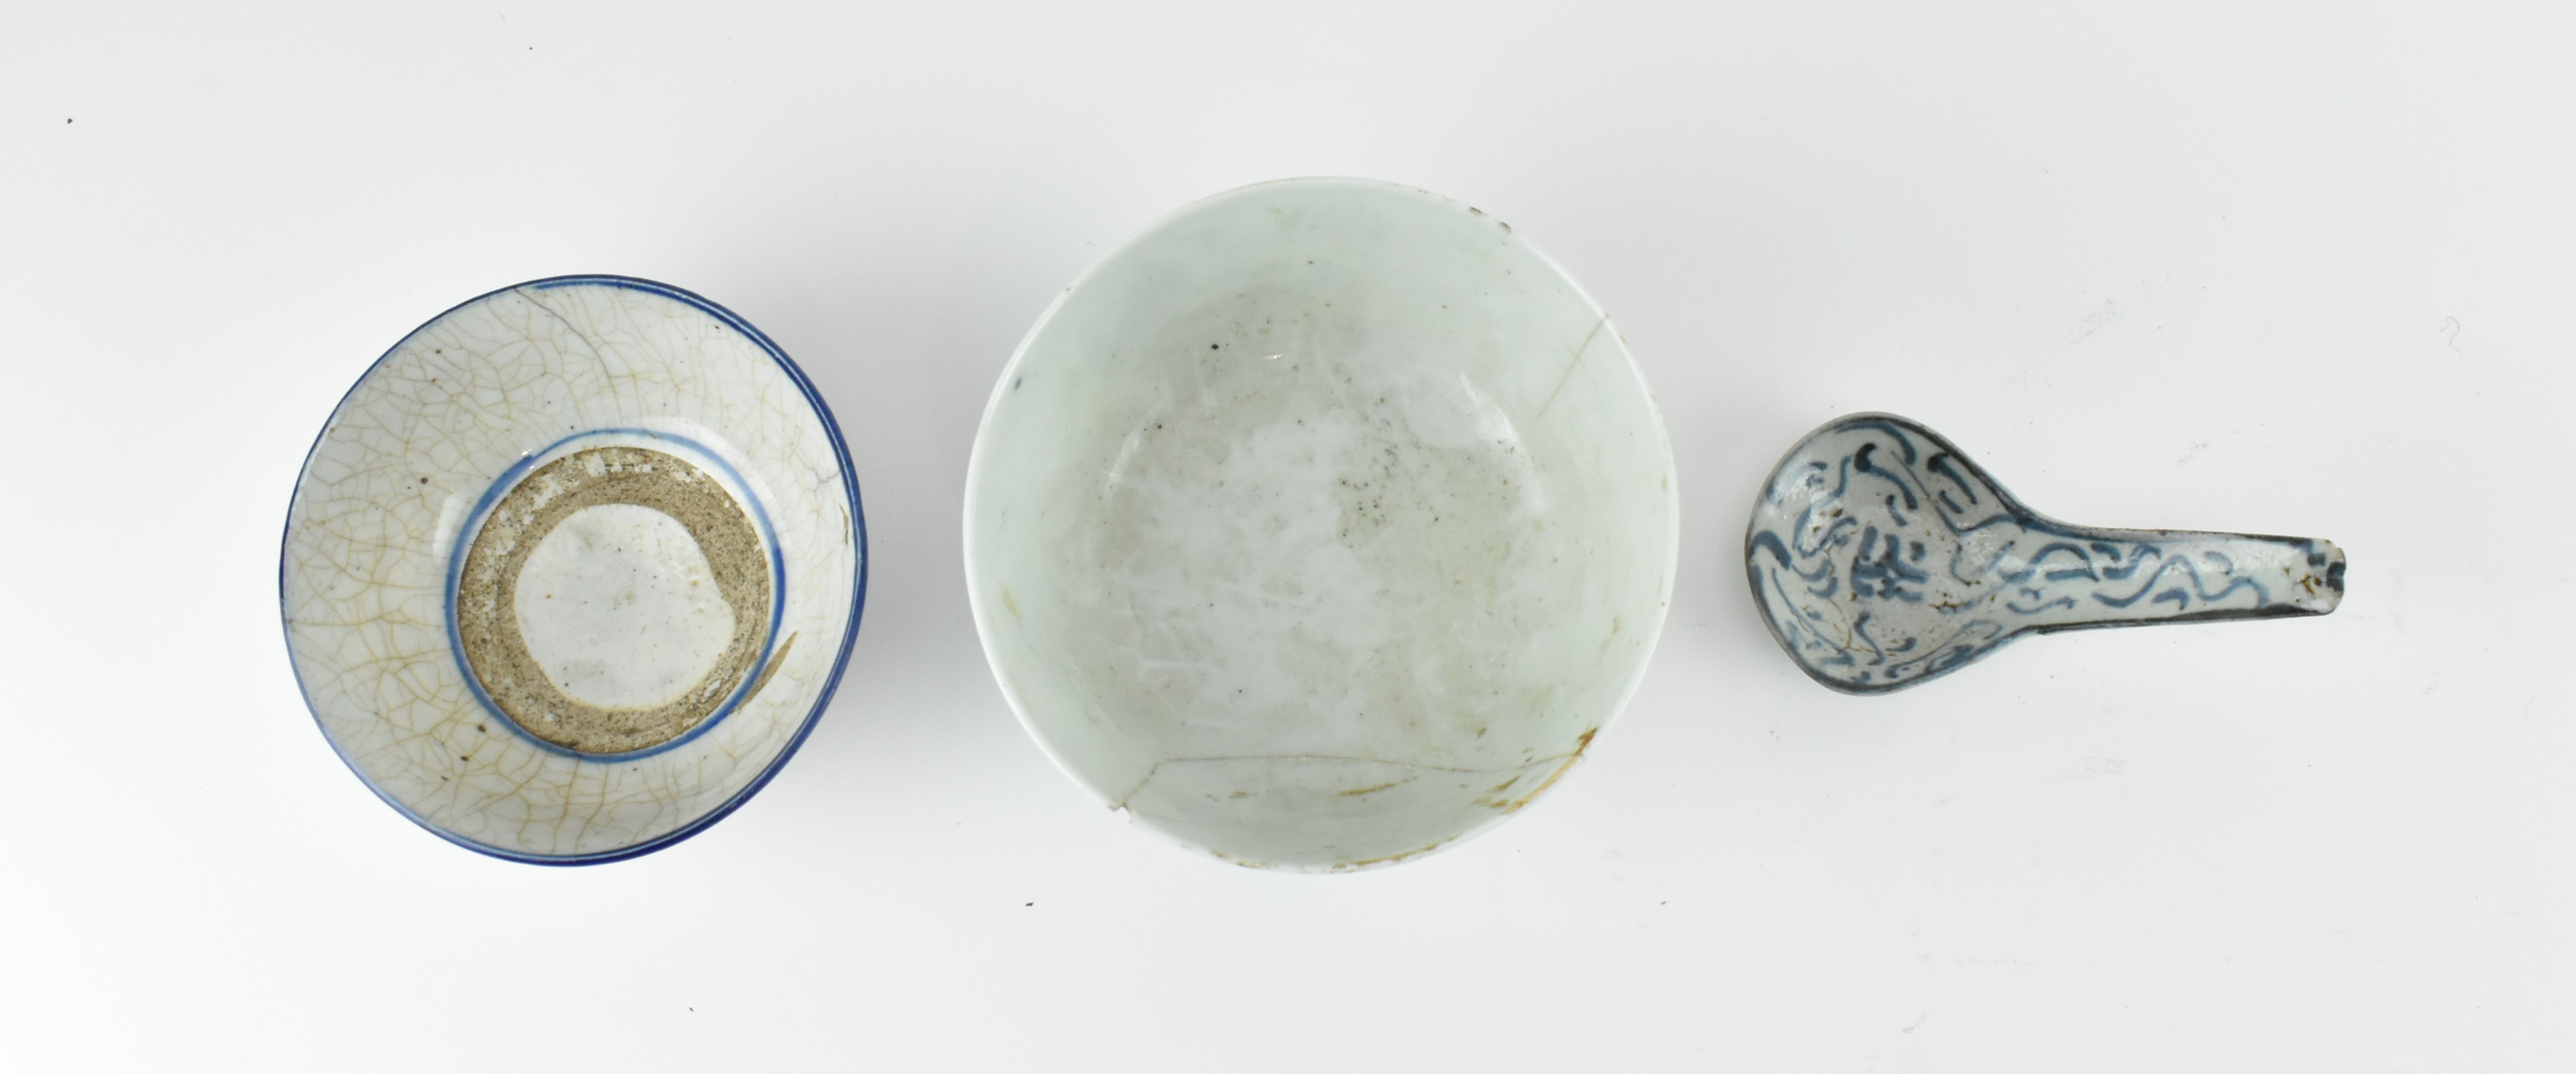 GROUP OF SIX QING DYNASTY CERAMIC ITEMS 清 陶瓷六件 - Image 6 of 7